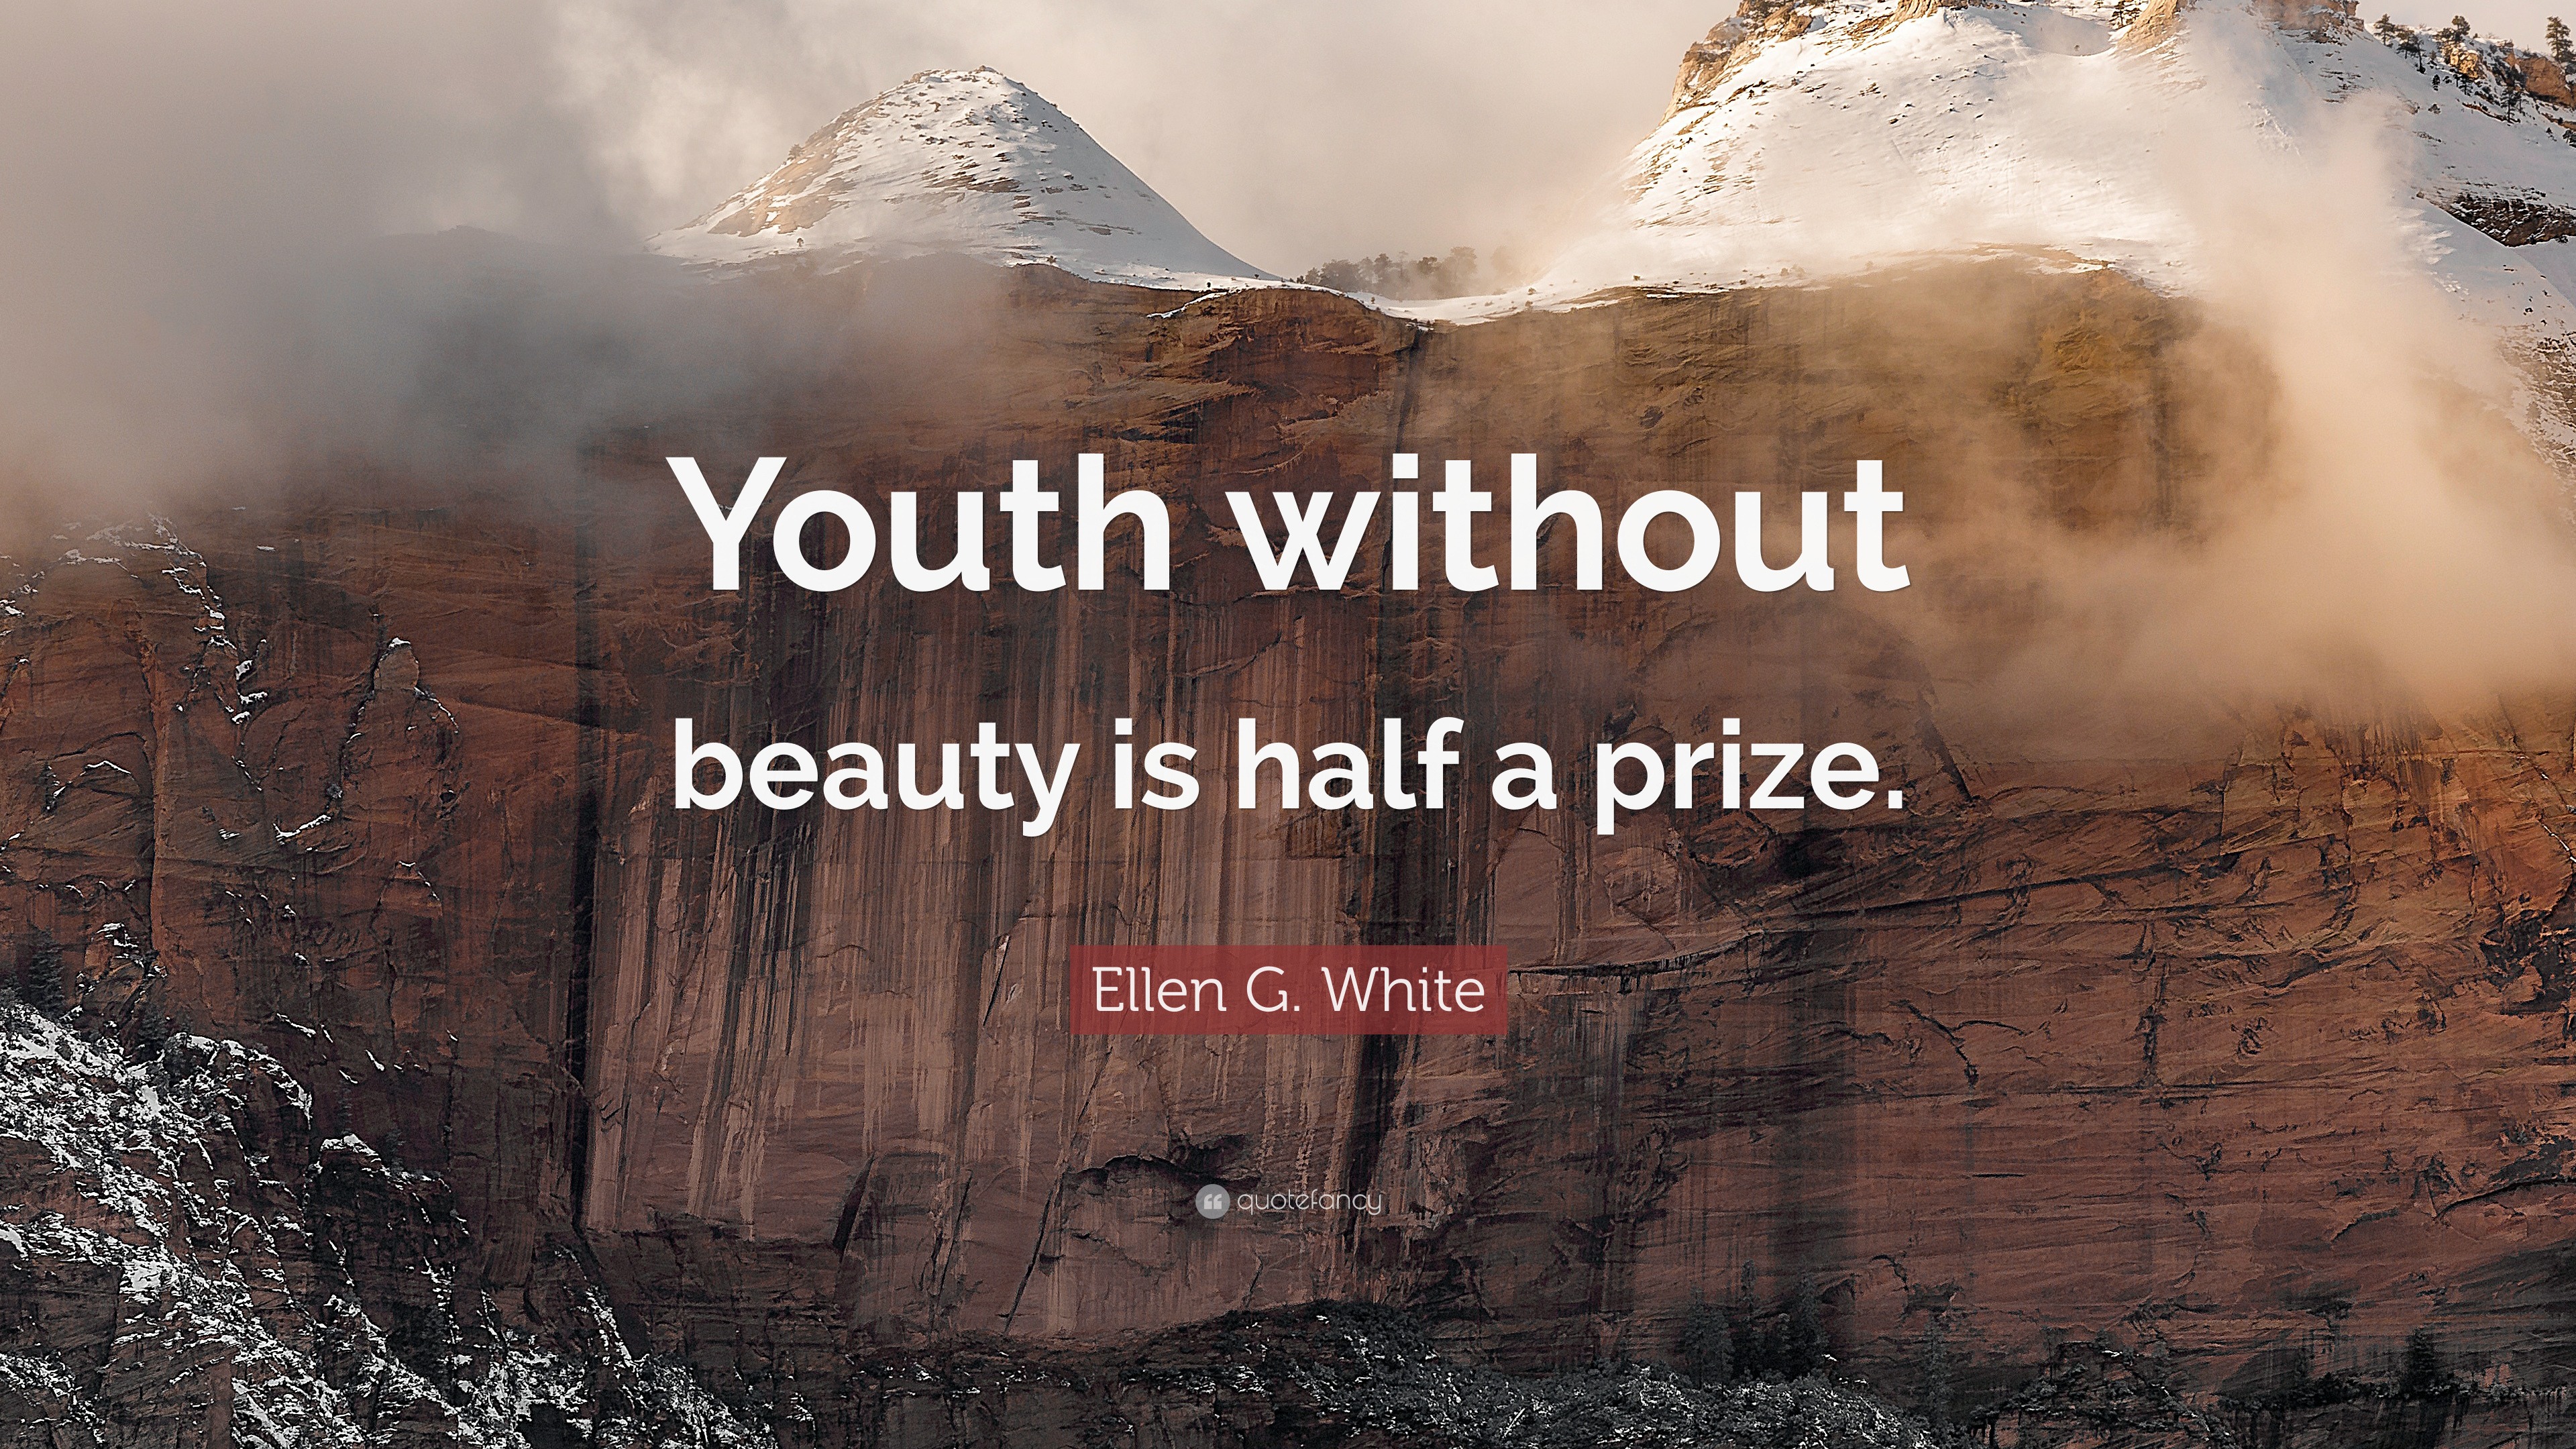 Ellen G. White Quote: “Youth without beauty is half a prize.”